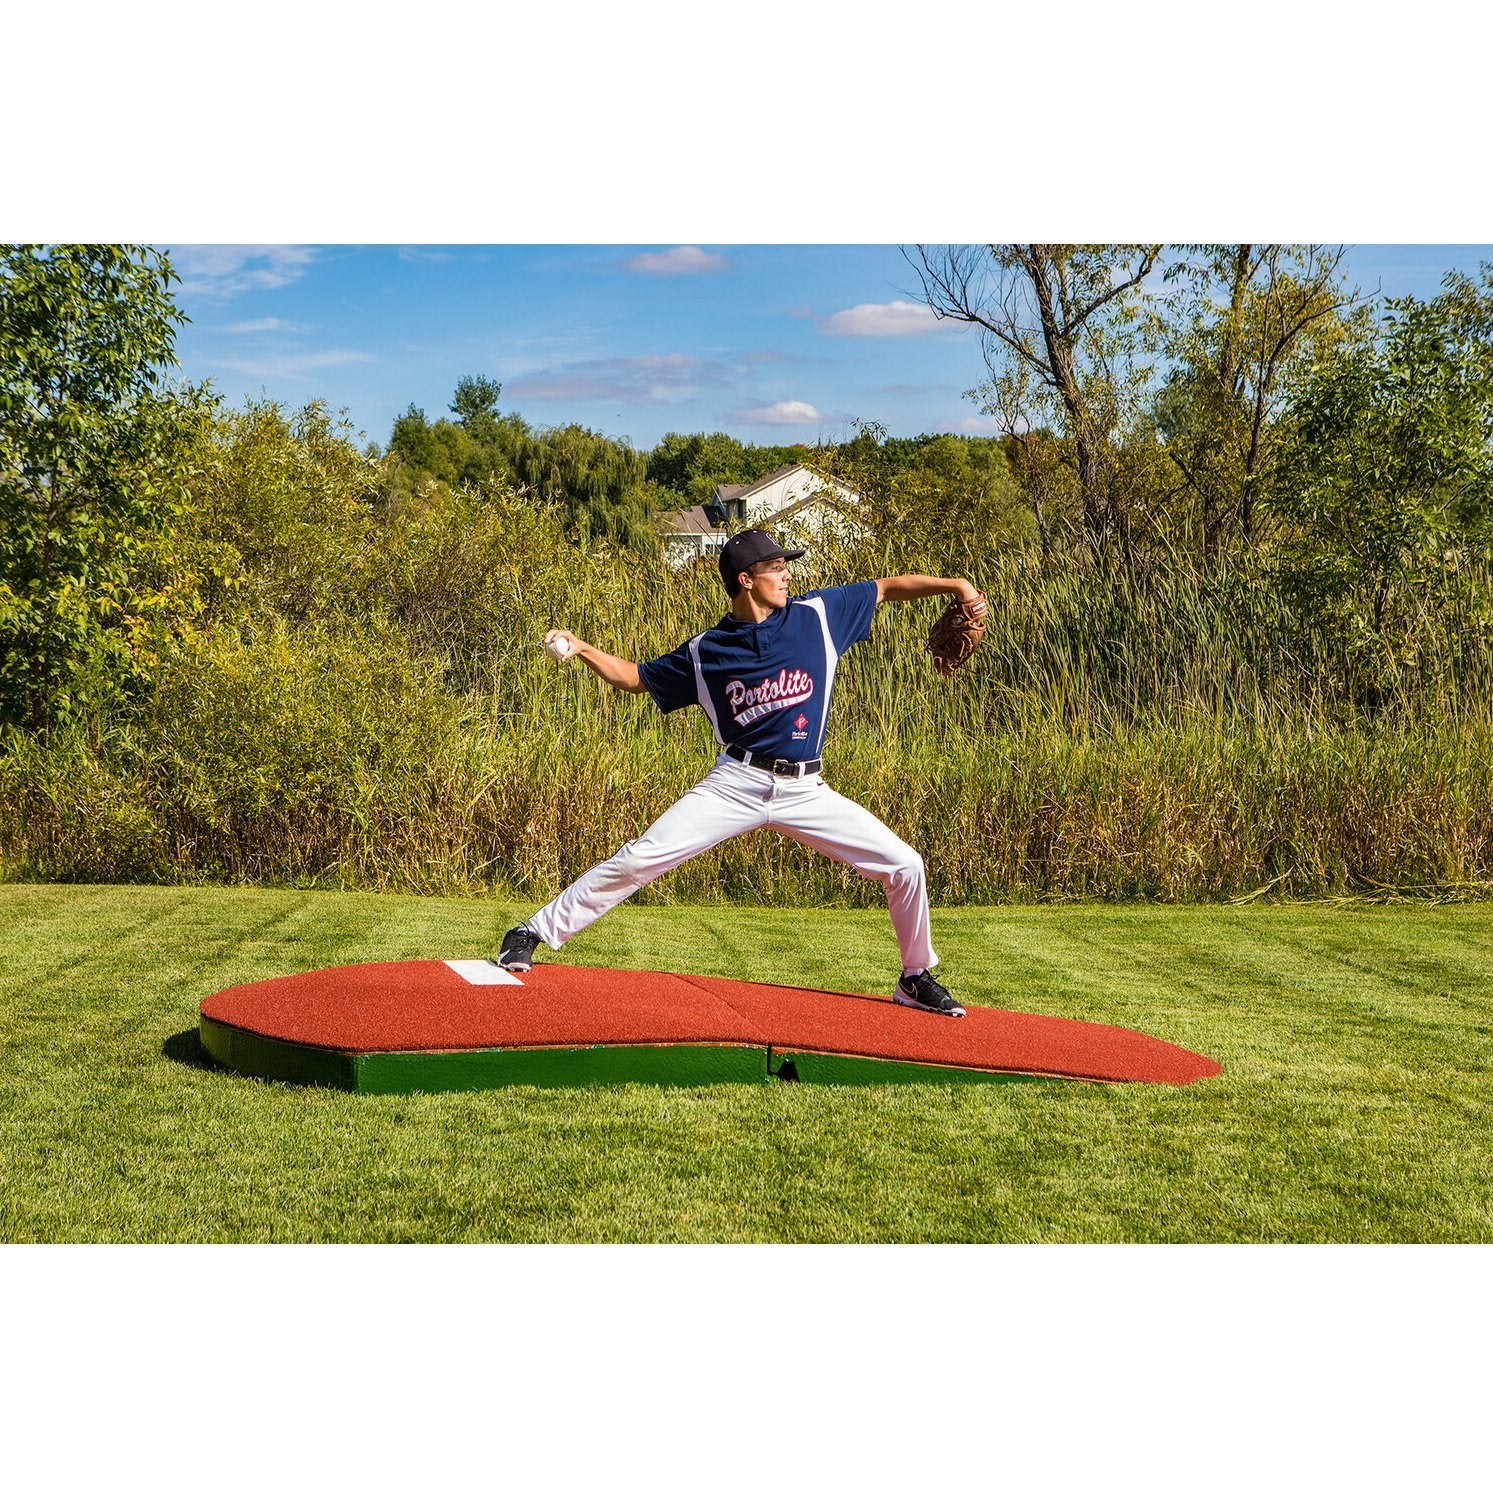 Portolite 10" Full Size 2-Piece Portable Practice Pitching Mound red side view pitcher on mound